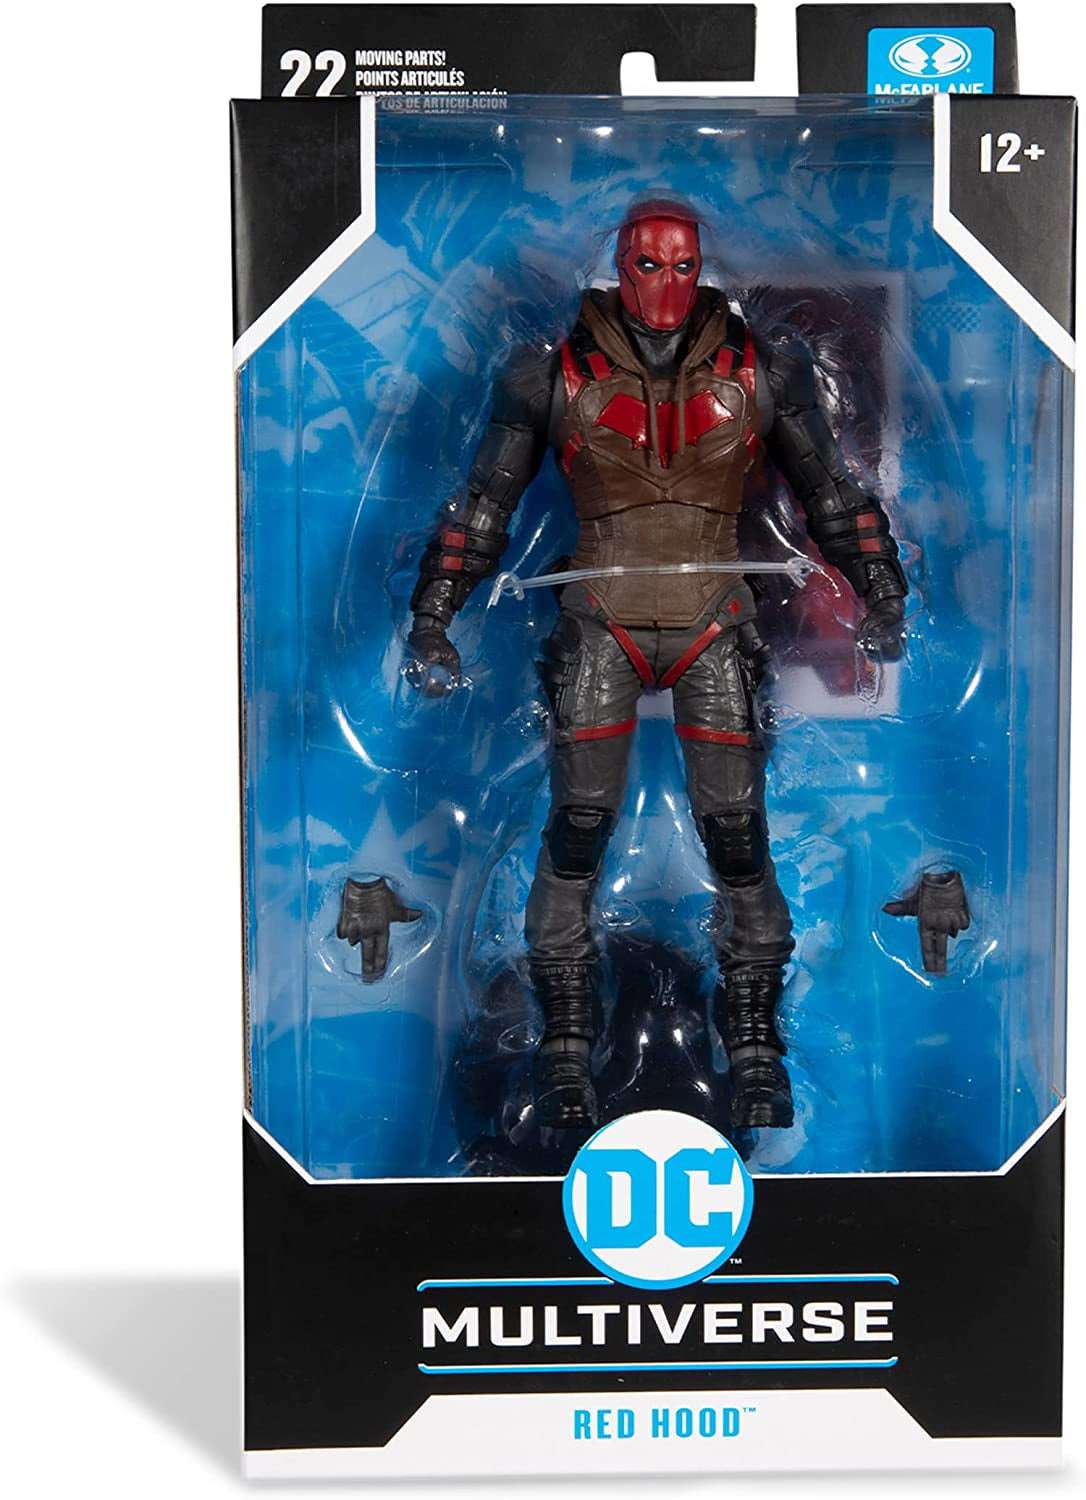 DC Multiverse Red Hood (Gotham Knights) 7" Action Figure with Accessories